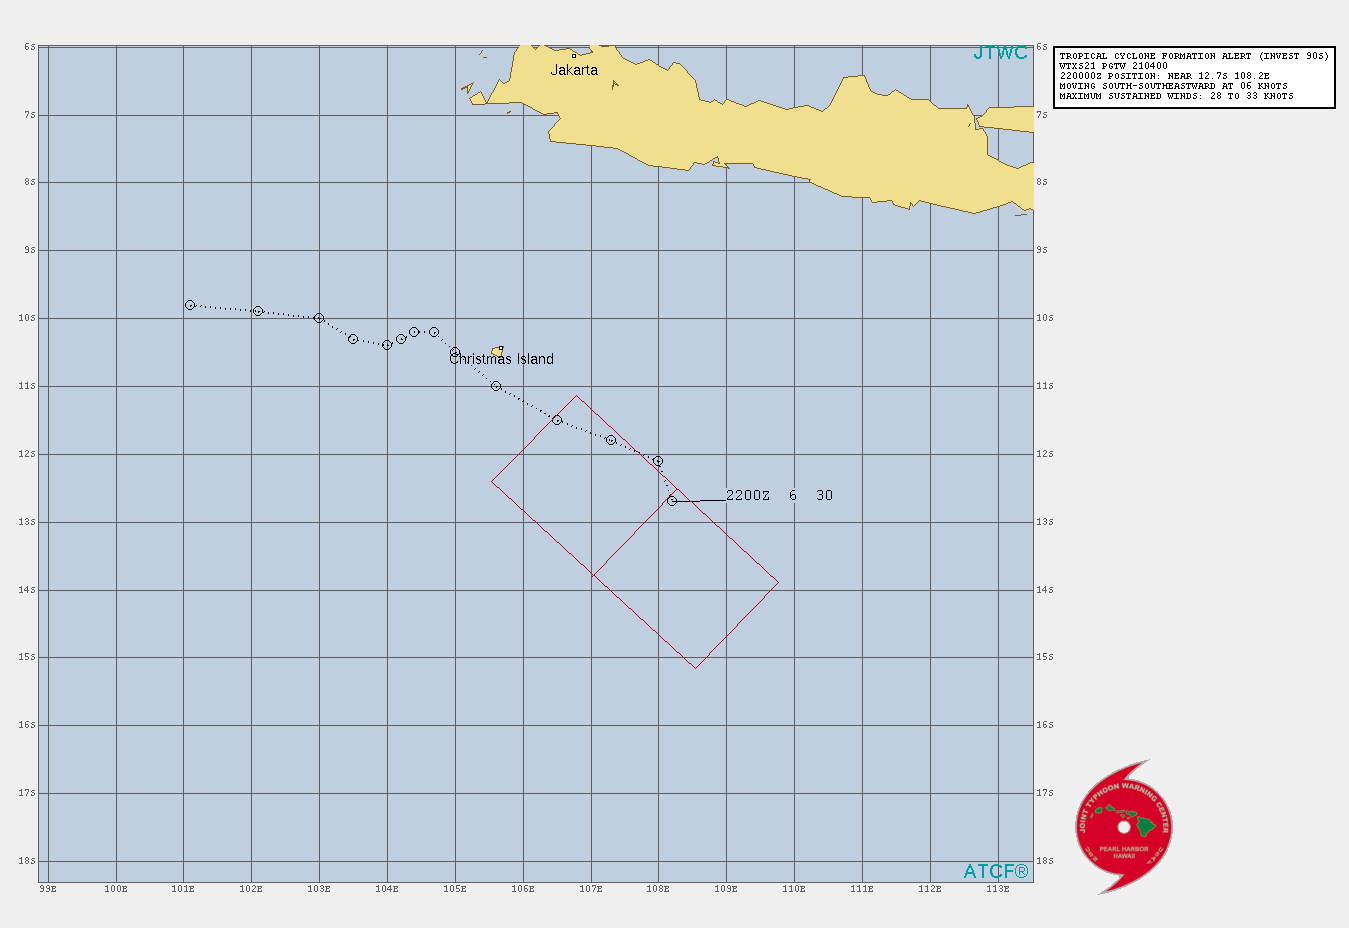 1. FORMATION OF A SIGNIFICANT TROPICAL CYCLONE IS POSSIBLE WITHIN 220 KM EITHER SIDE OF A LINE FROM 12.5S 108.3E TO 13.8S 107.0E WITHIN THE NEXT 12 TO 24 HOURS. AVAILABLE DATA DOES NOT JUSTIFY ISSUANCE OF NUMBERED TROPICAL CYCLONE WARNINGS AT THIS TIME. WINDS IN THE AREA ARE ESTIMATED TO BE 28 TO 33 KNOTS. METSAT IMAGERY AT 220000Z INDICATES THAT A CIRCULATION CENTER IS LOCATED NEAR 12.7S 108.2E. THE SYSTEM IS MOVING SOUTH-SOUTHEASTWARD AT 11 KM/H. 2. REMARKS:AN AREA OF CONVECTION (INVEST 90S) HAS PERSISTED NEAR  12.7S 108.2E, APPROXIMATELY 370 KM SOUTHEAST OF CHRISTMAS ISLAND.  ANIMATED ENHANCED MULTISPECTRAL SATELLITE IMAGERY (MSI) AND A  220153Z ASCAT METOP-B PASS DEPICT A WELL STRUCTURED SYSTEM WITH  CONVECTION AND EMBEDDED 30-35KT WINDS WRAPPING INTO A  CONSOLIDATED LOW-LEVEL CIRCULATION CENTER. ENVIRONMENTAL ANALYSIS  SHOWS FAVORABLE CONDITIONS WITH EXCELLENT POLEWARD OUTFLOW DUE TO  THE DISTURBANCE BEING NEAR THE DIVERGENT QUADRANT OF A COL REGION,  LOW (10-15KT) VERTICAL WIND SHEAR, AND WARM (28-29C) SEA SURFACE  TEMPURTURES. GLOBAL MODELS ARE IN AGREEMENT THAT THIS SYSTEM WILL  REACH A PEAK INTENSITY OF 35KTS AND DISSIPATE BY TAU 96. MAXIMUM  SUSTAINED SURFACE WINDS ARE ESTIMATED AT 28 TO 33 KNOTS. MINIMUM SEA  LEVEL PRESSURE IS ESTIMATED TO BE NEAR 998 MB. THE POTENTIAL FOR THE  DEVELOPMENT OF A SIGNIFICANT TROPICAL CYCLONE WITHIN THE NEXT 24  HOURS IS HIGH.